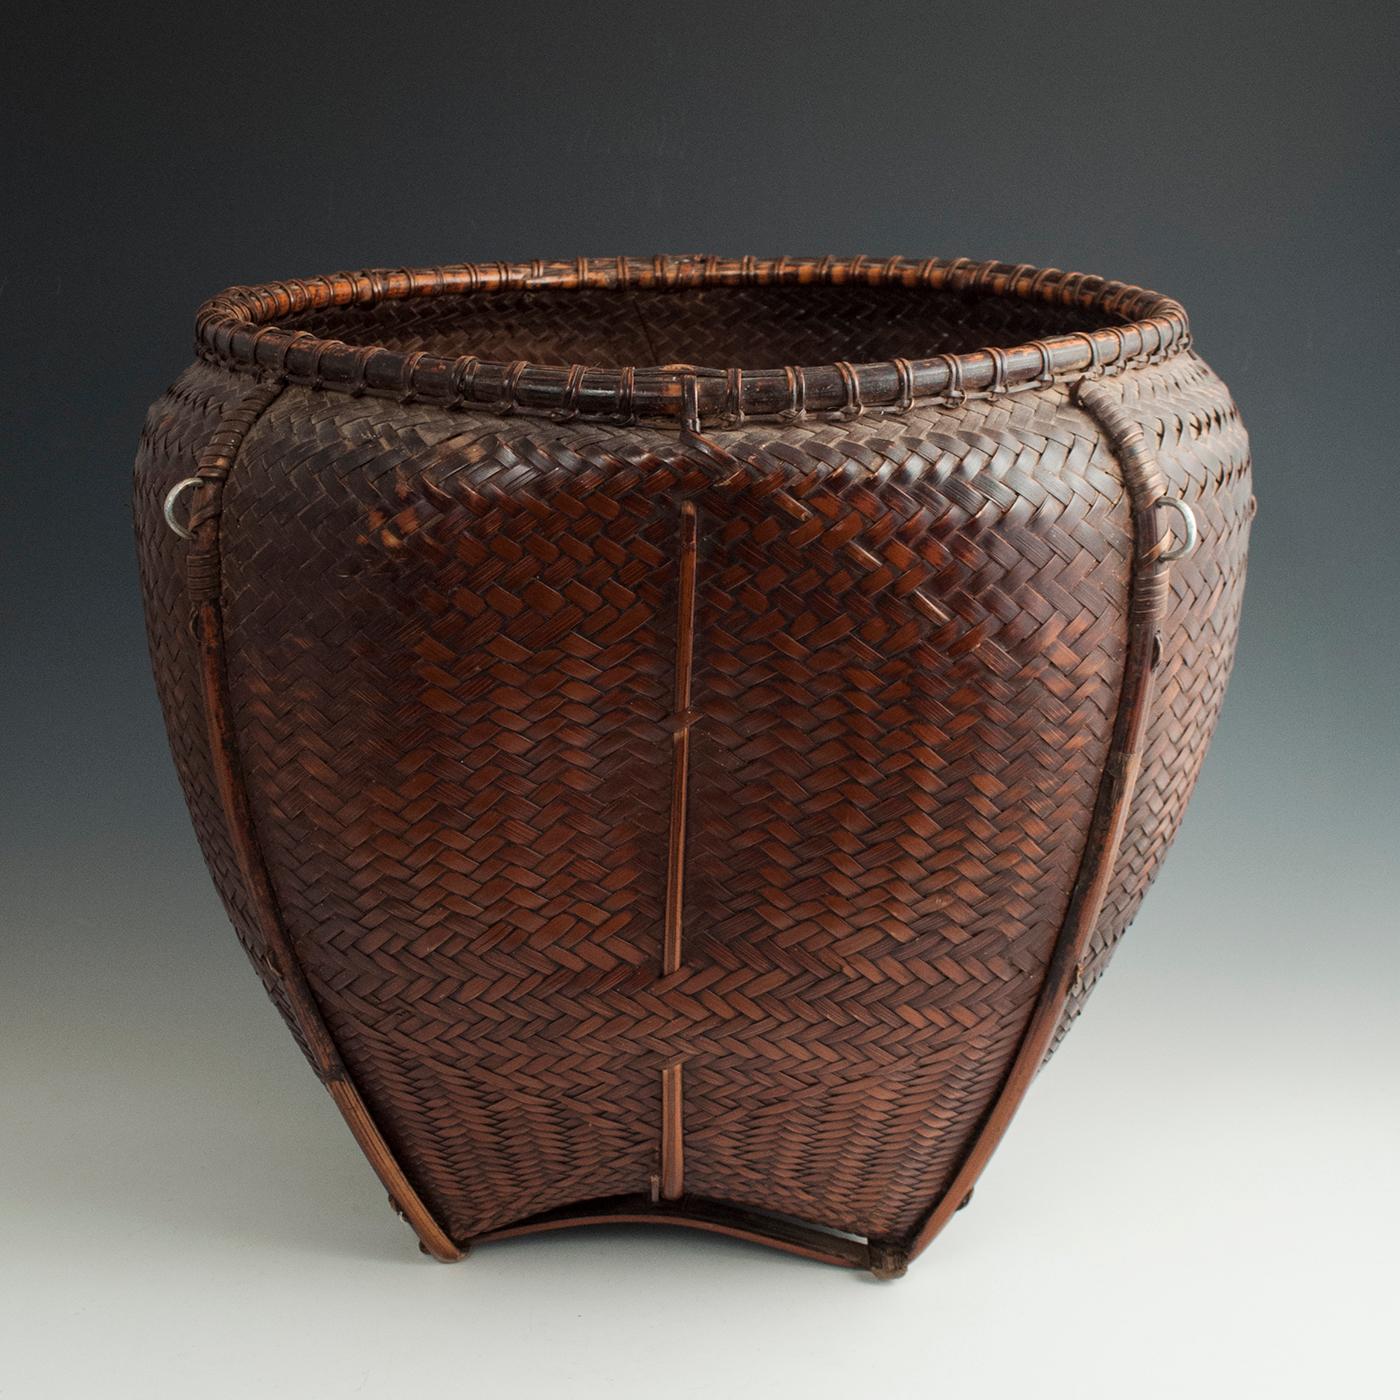 Hand-Crafted Early to Mid-20th Century Tribal Bamboo Collecting Basket, Attapeu Area, Laos